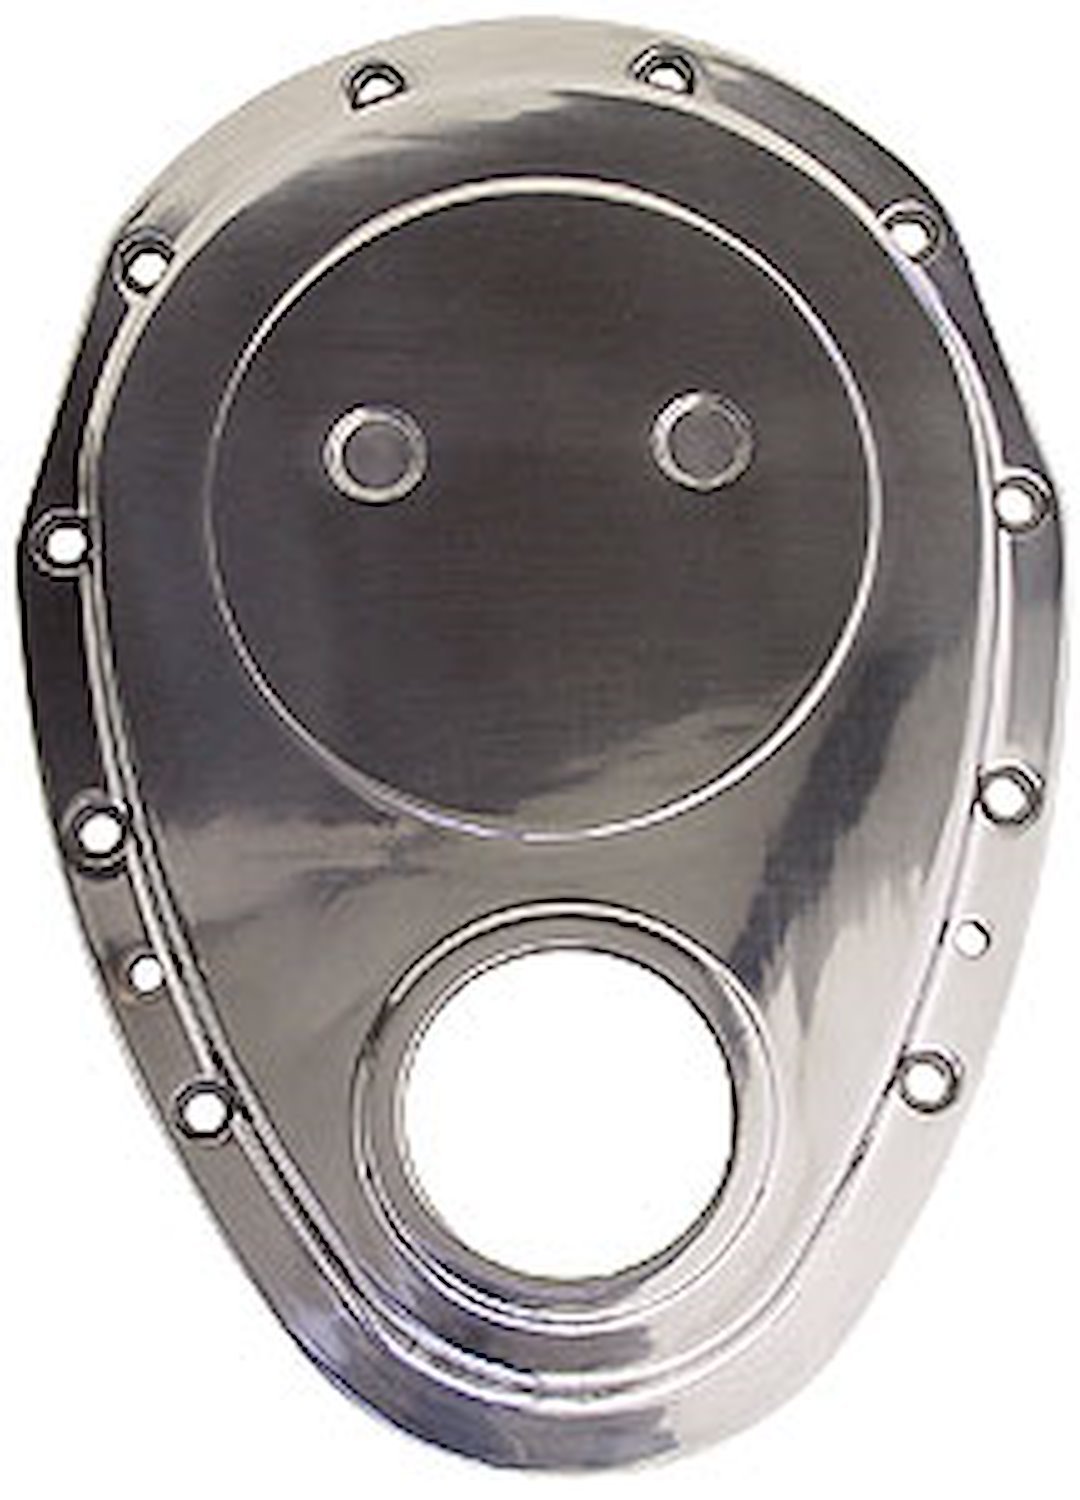 Aluminum Timing Chain Cover 1958-86 SB-Chevy